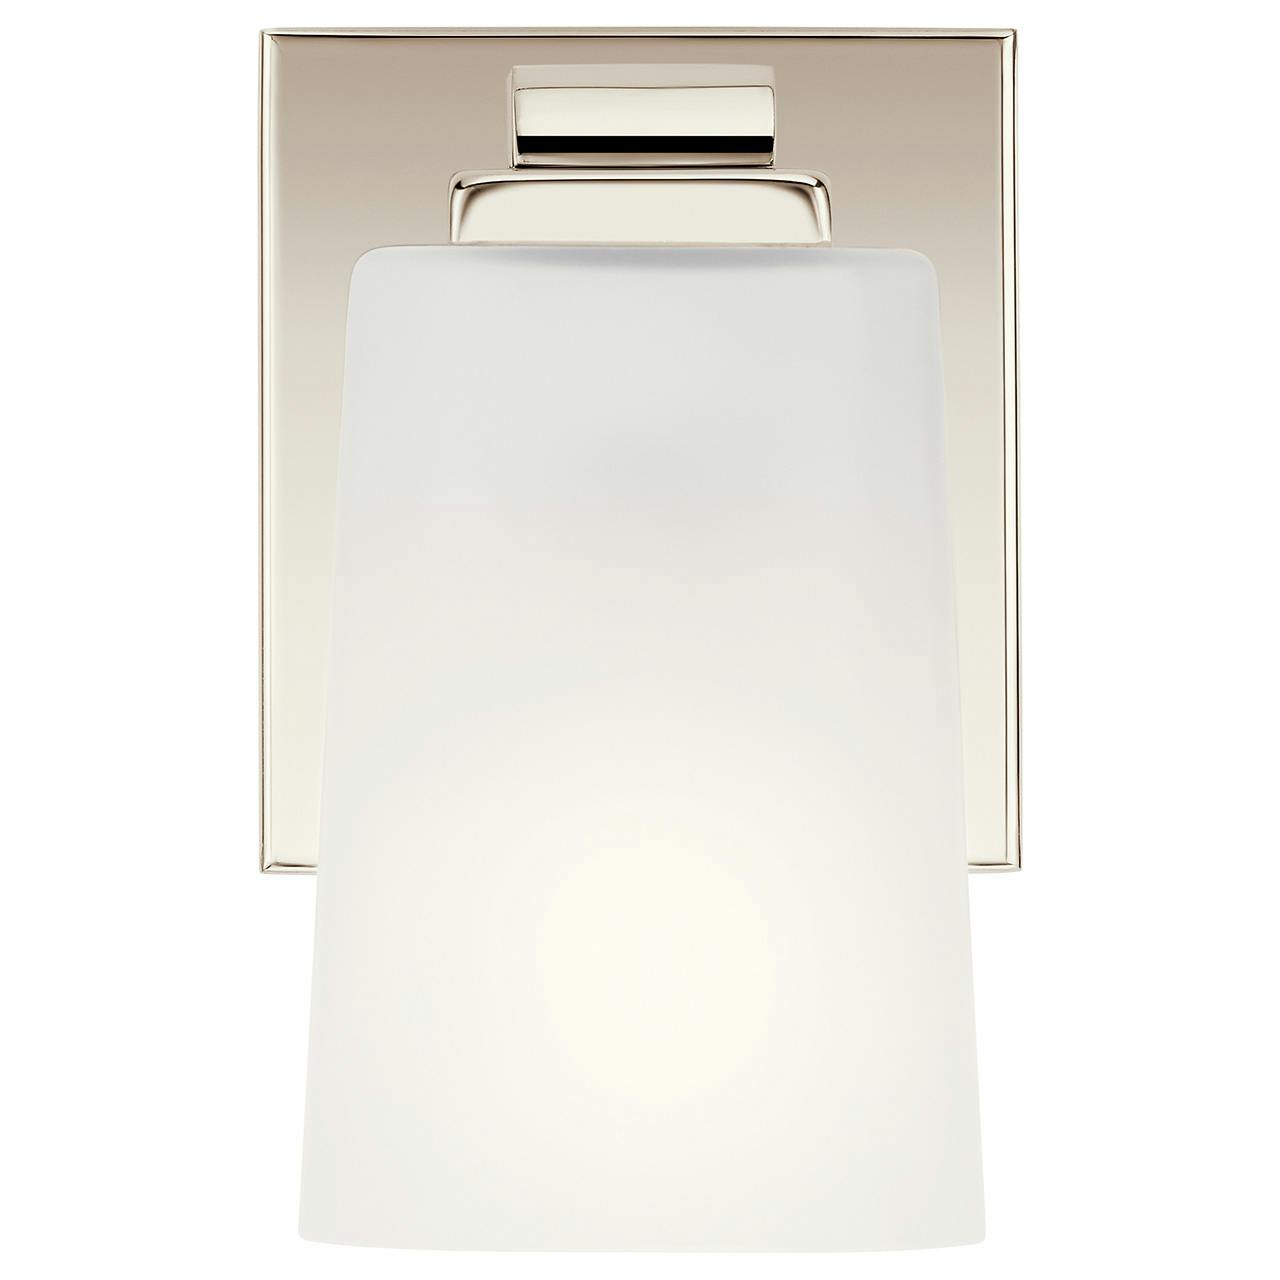 The Roehm 1 Light Wall Sconce Polished Nickel facing down on a white background